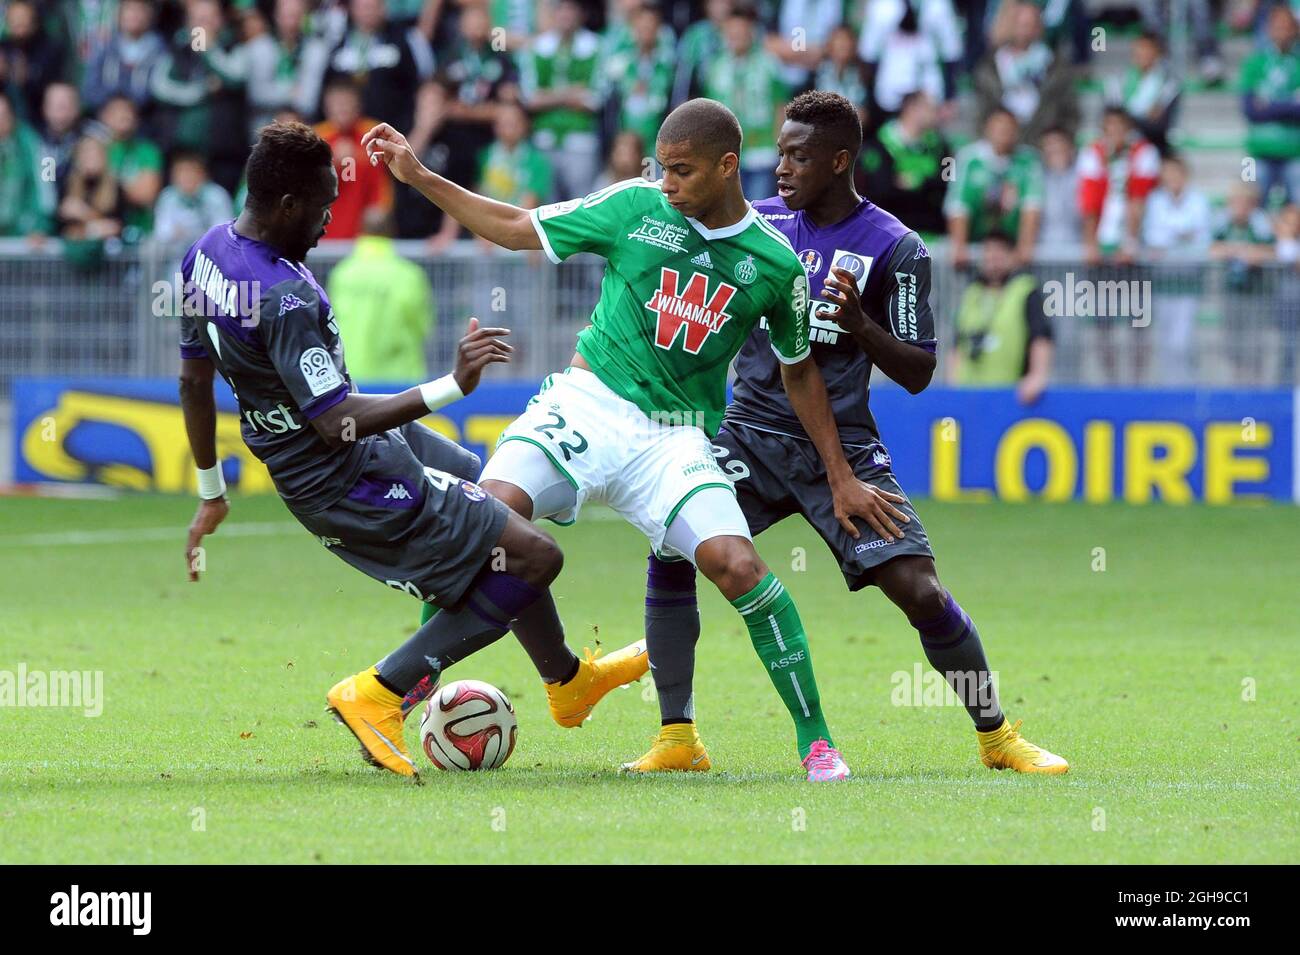 Kevin Monnet Paquet during the French Ligue 1 match between AS Saint Etienne and Toulouse at the Stade Geoffroy Guichard in France on October 05, 2014. Stock Photo